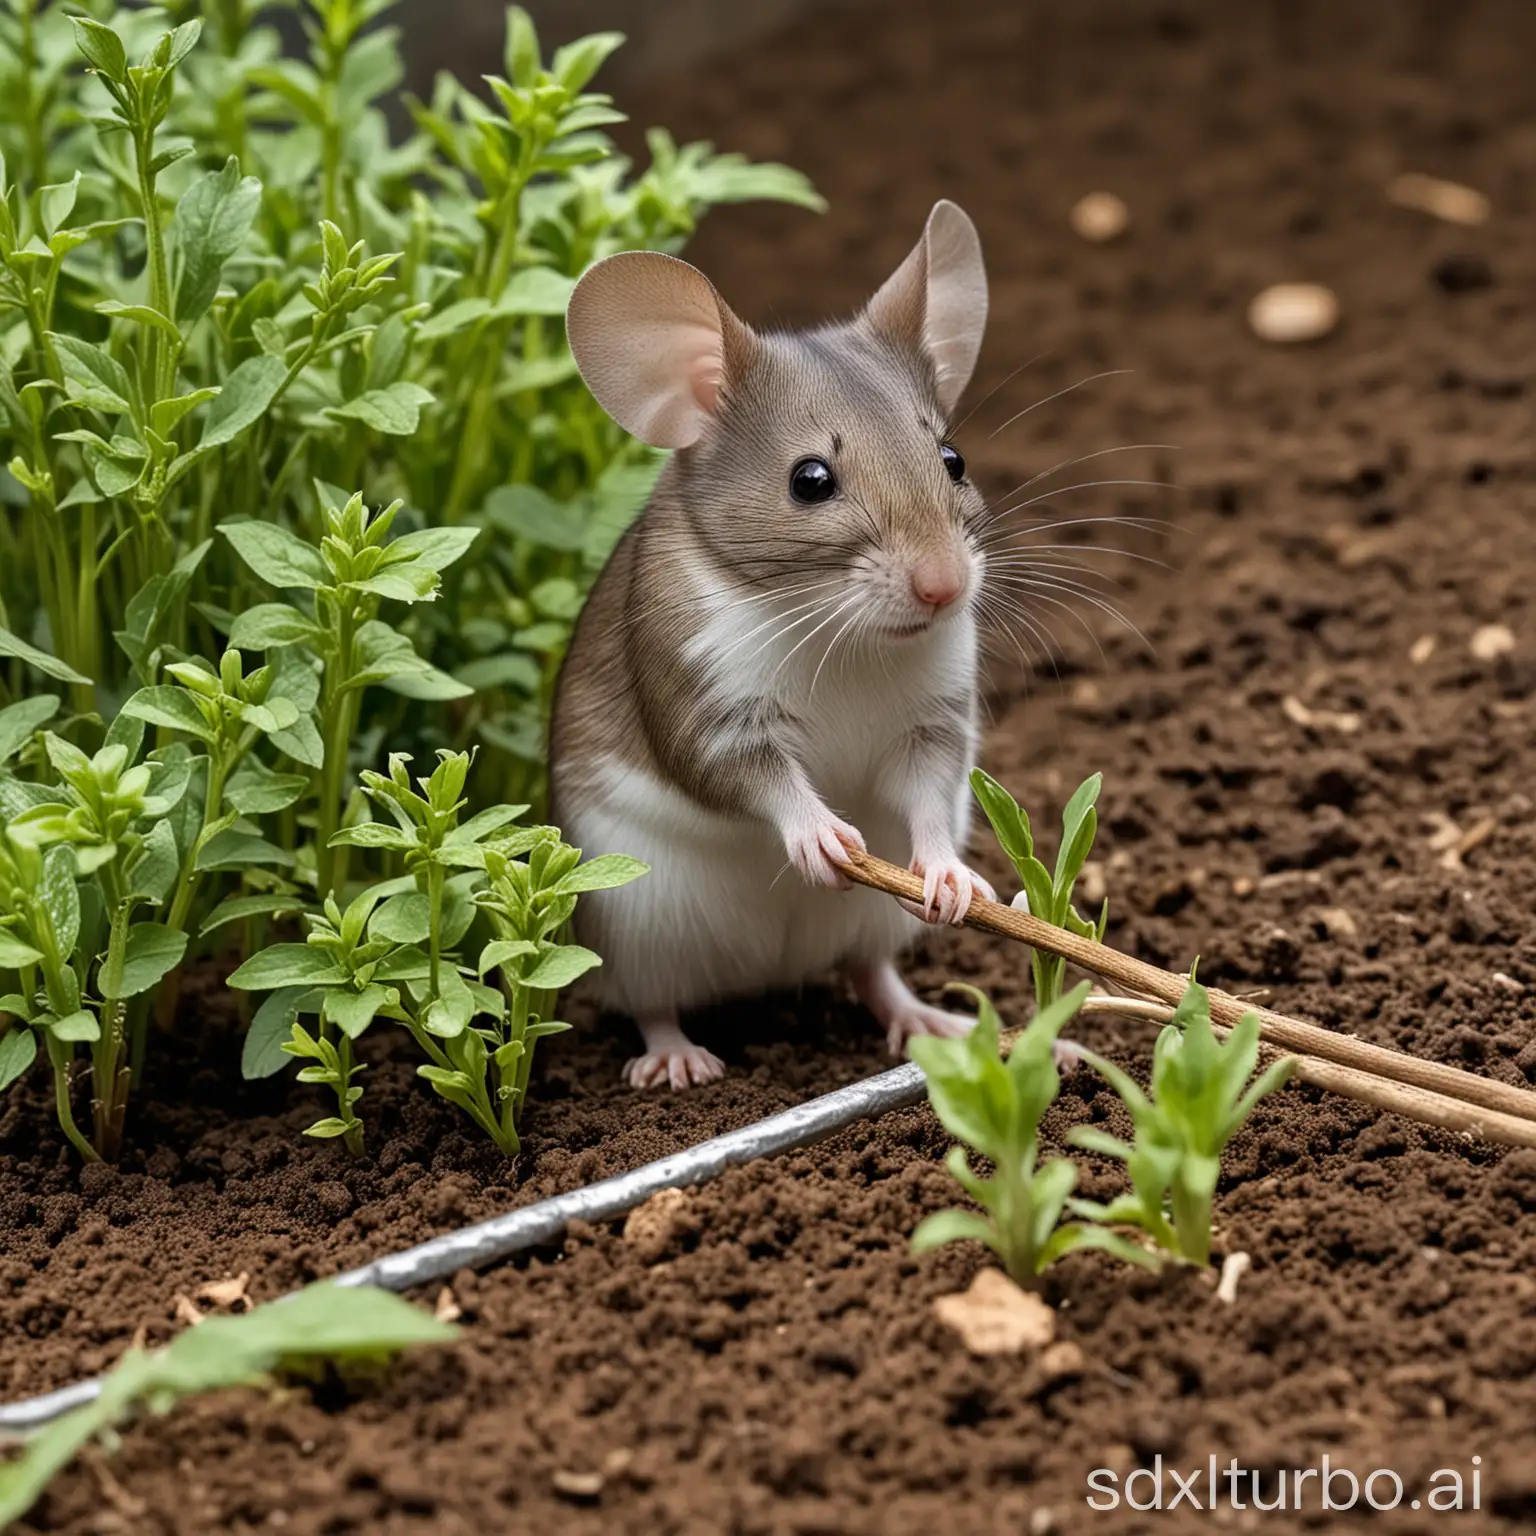 A mouse does gardening work, planting, etc.